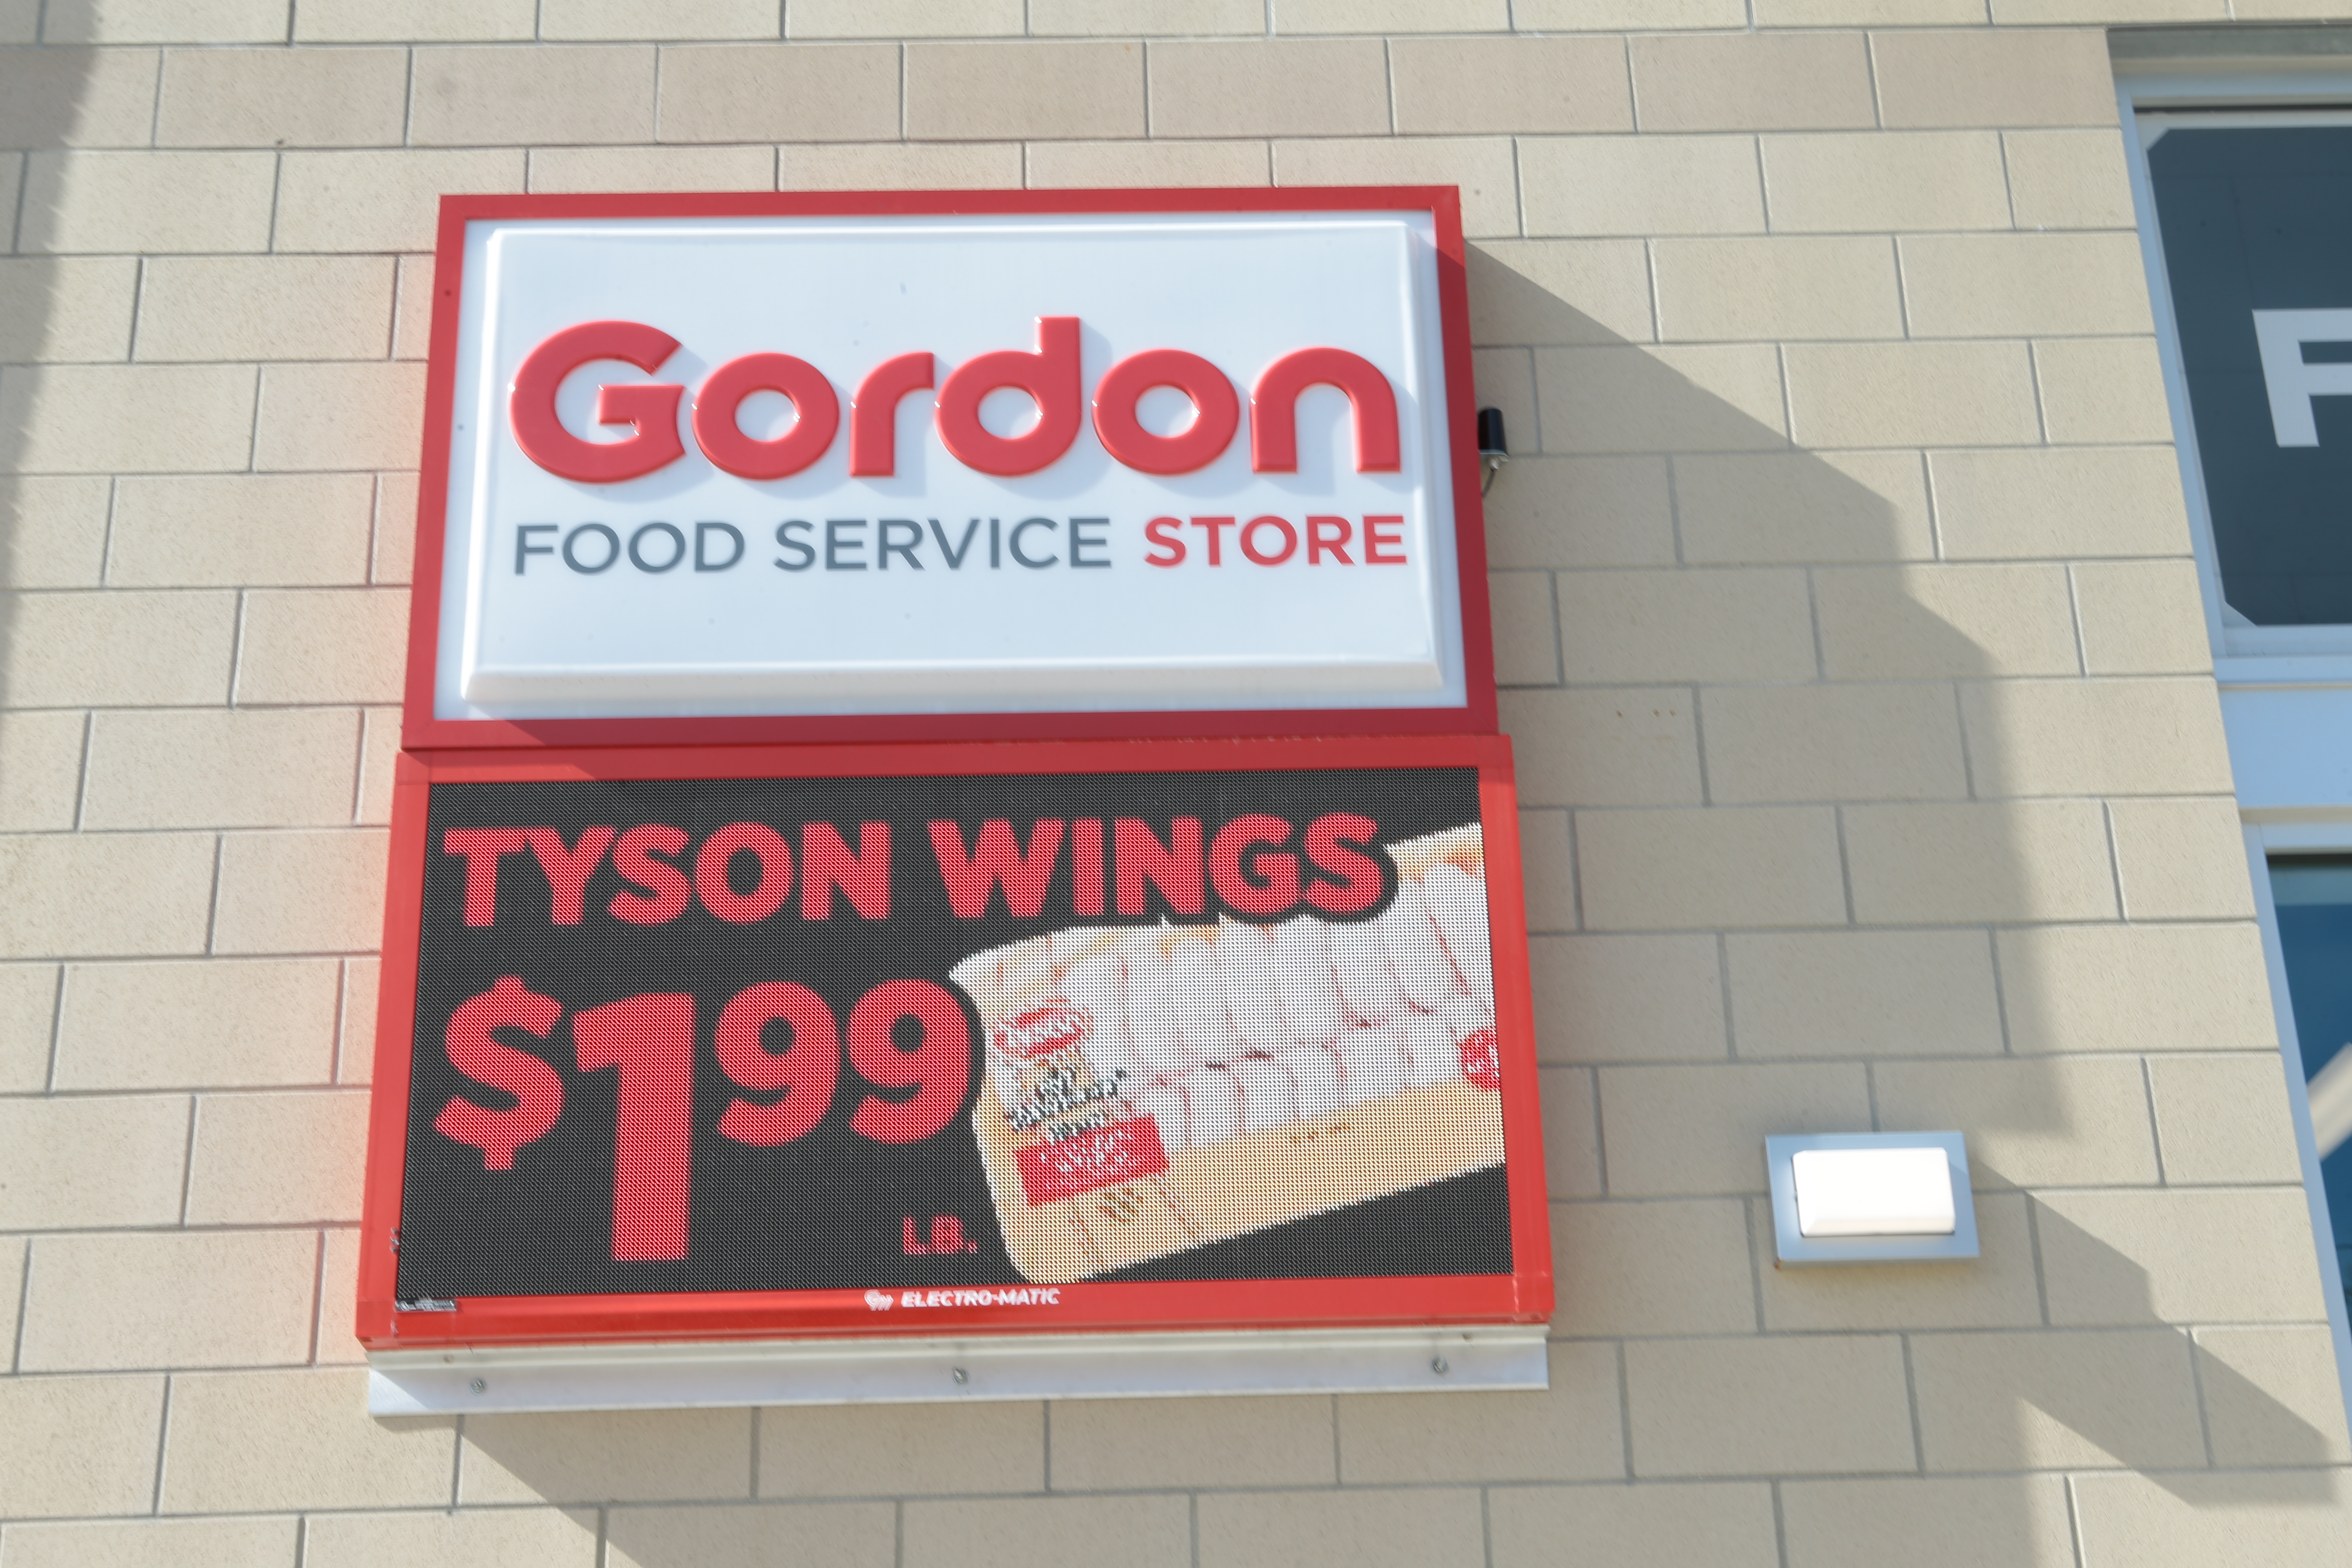 Electro-Matic LED Displays Help Gordon Food Service Rebrand to Consumers